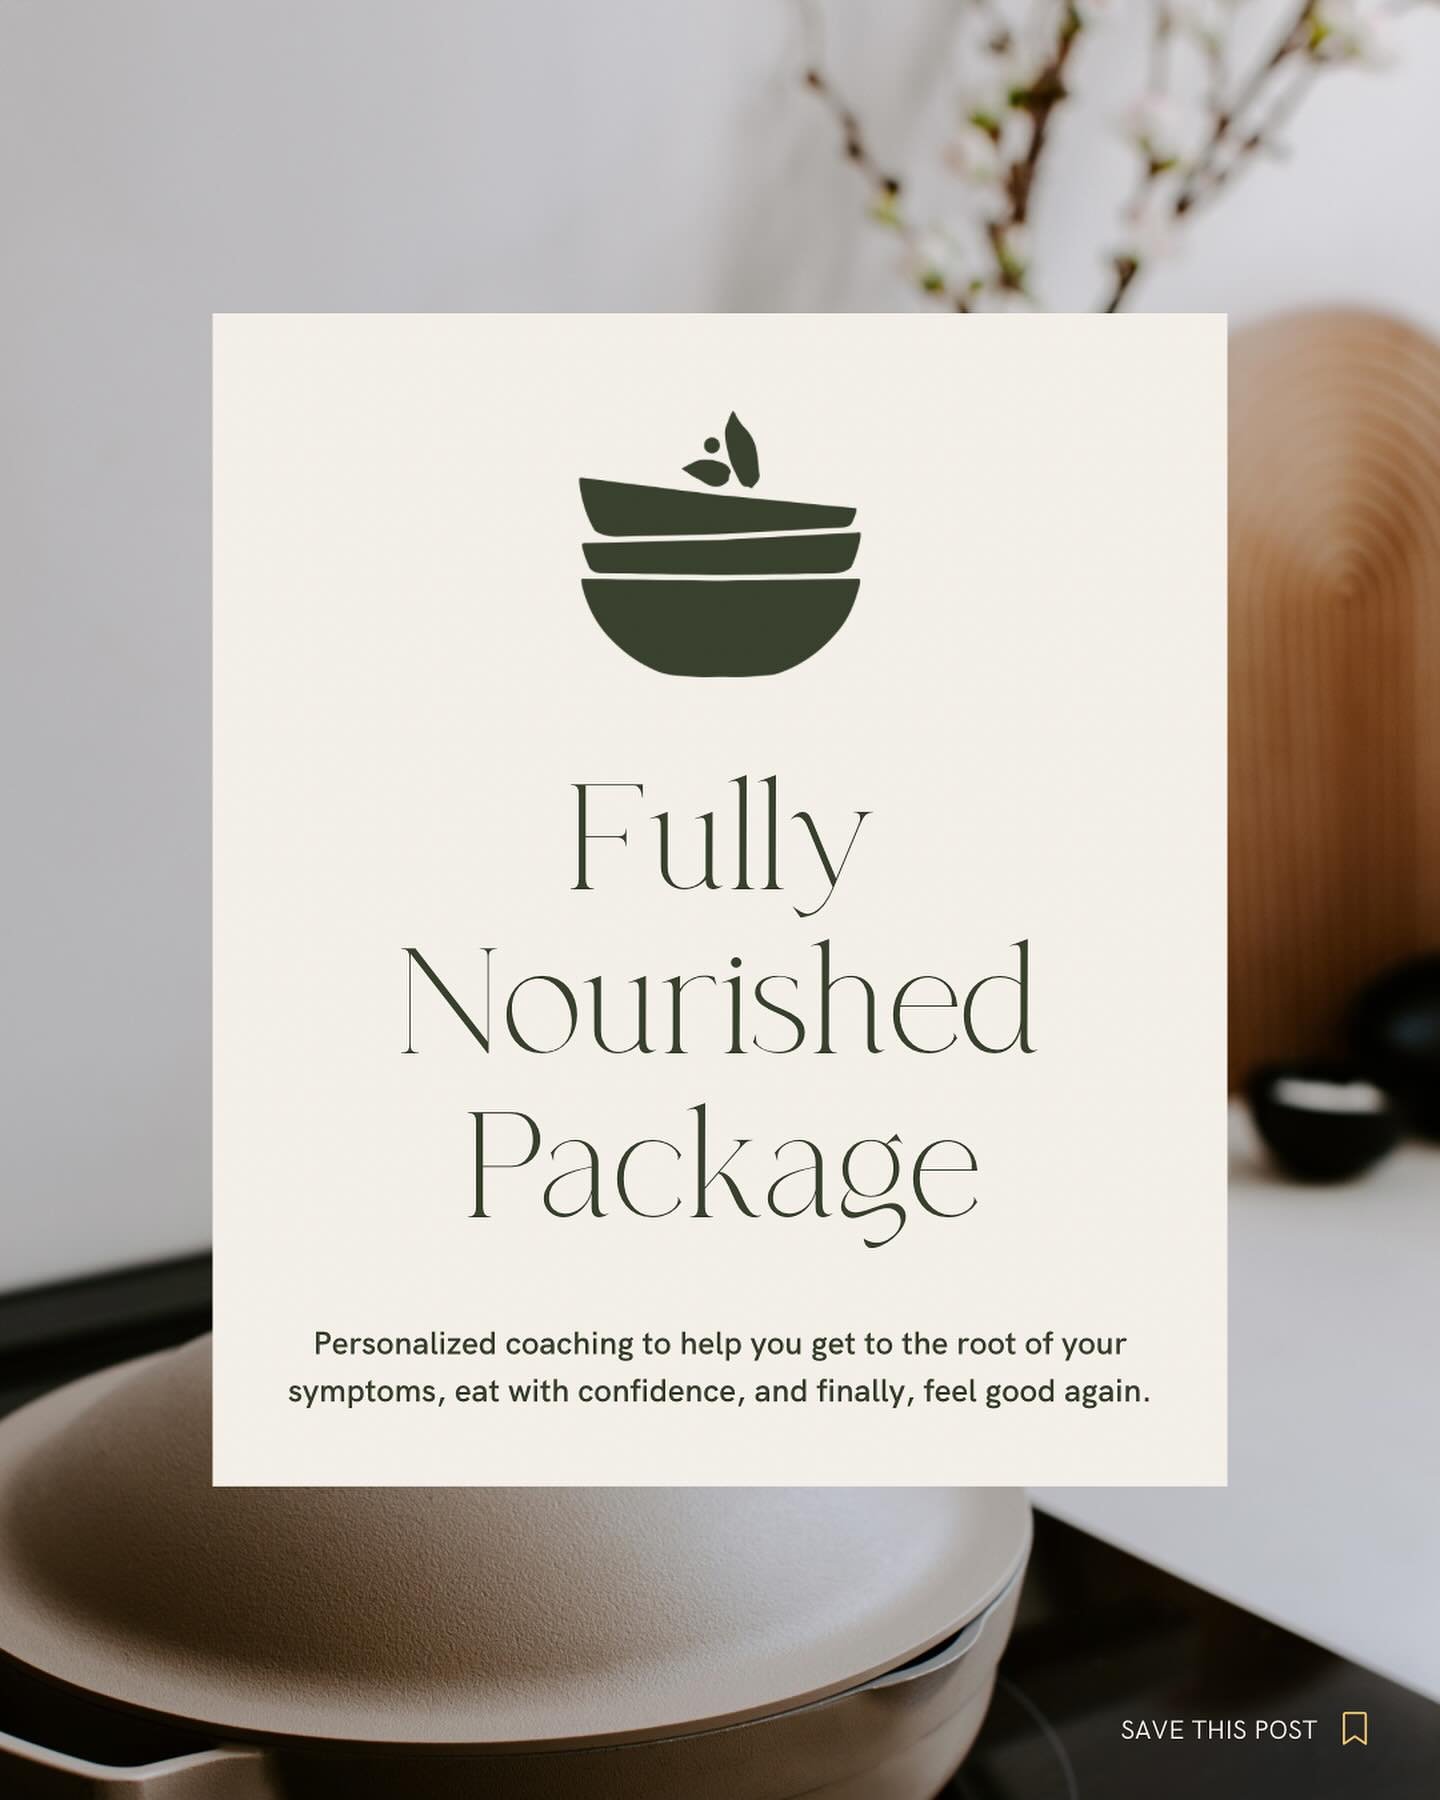 Introducing the ✨Fully Nourished Package✨! The only way to work with me (because it&rsquo;s the best way!) 

With the right testing and a highly personalized plan, we&rsquo;ll find the root cause of your health issues and address them directly. No ba